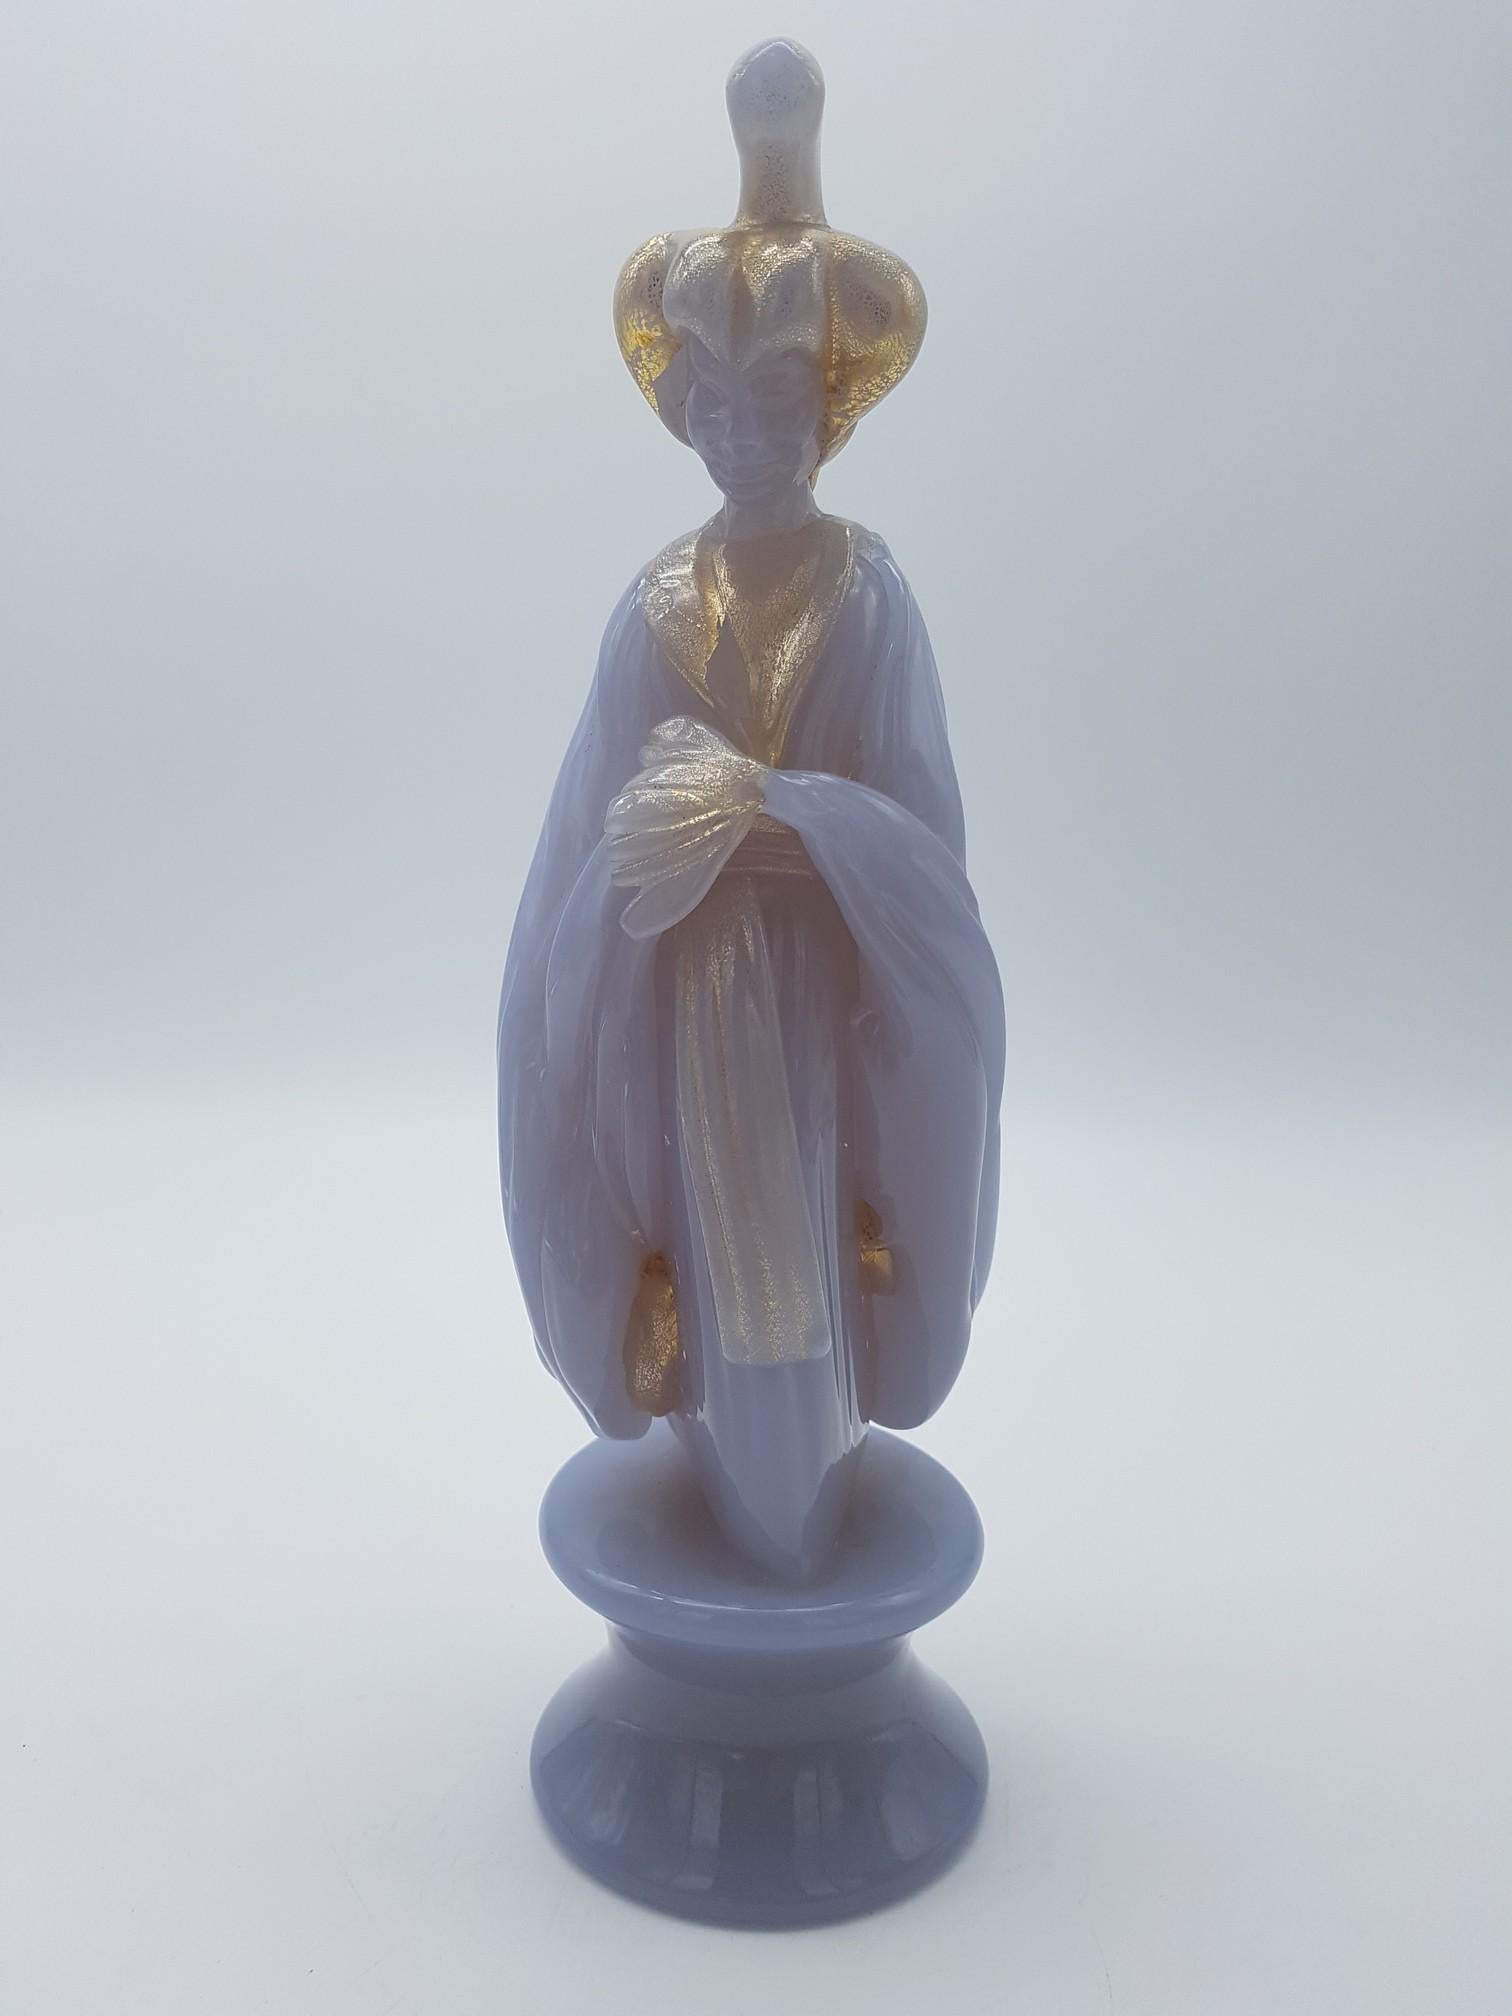 Vintage Murano Glass Geisha Figurine by Ermanno Nason at Cenedese, Late 1960s For Sale 4